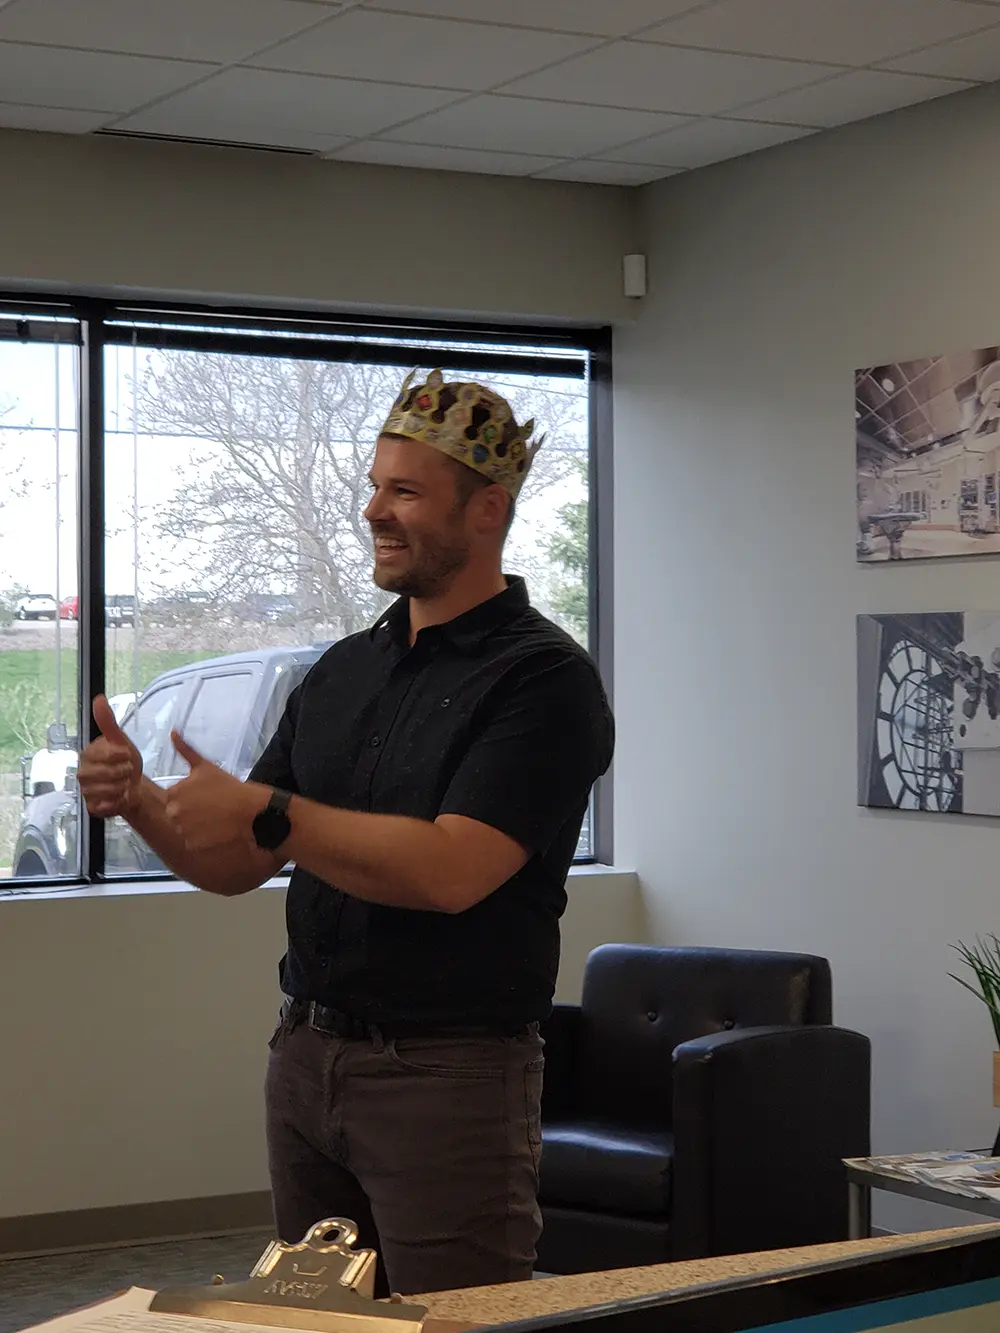 Chuck with a birthday crown